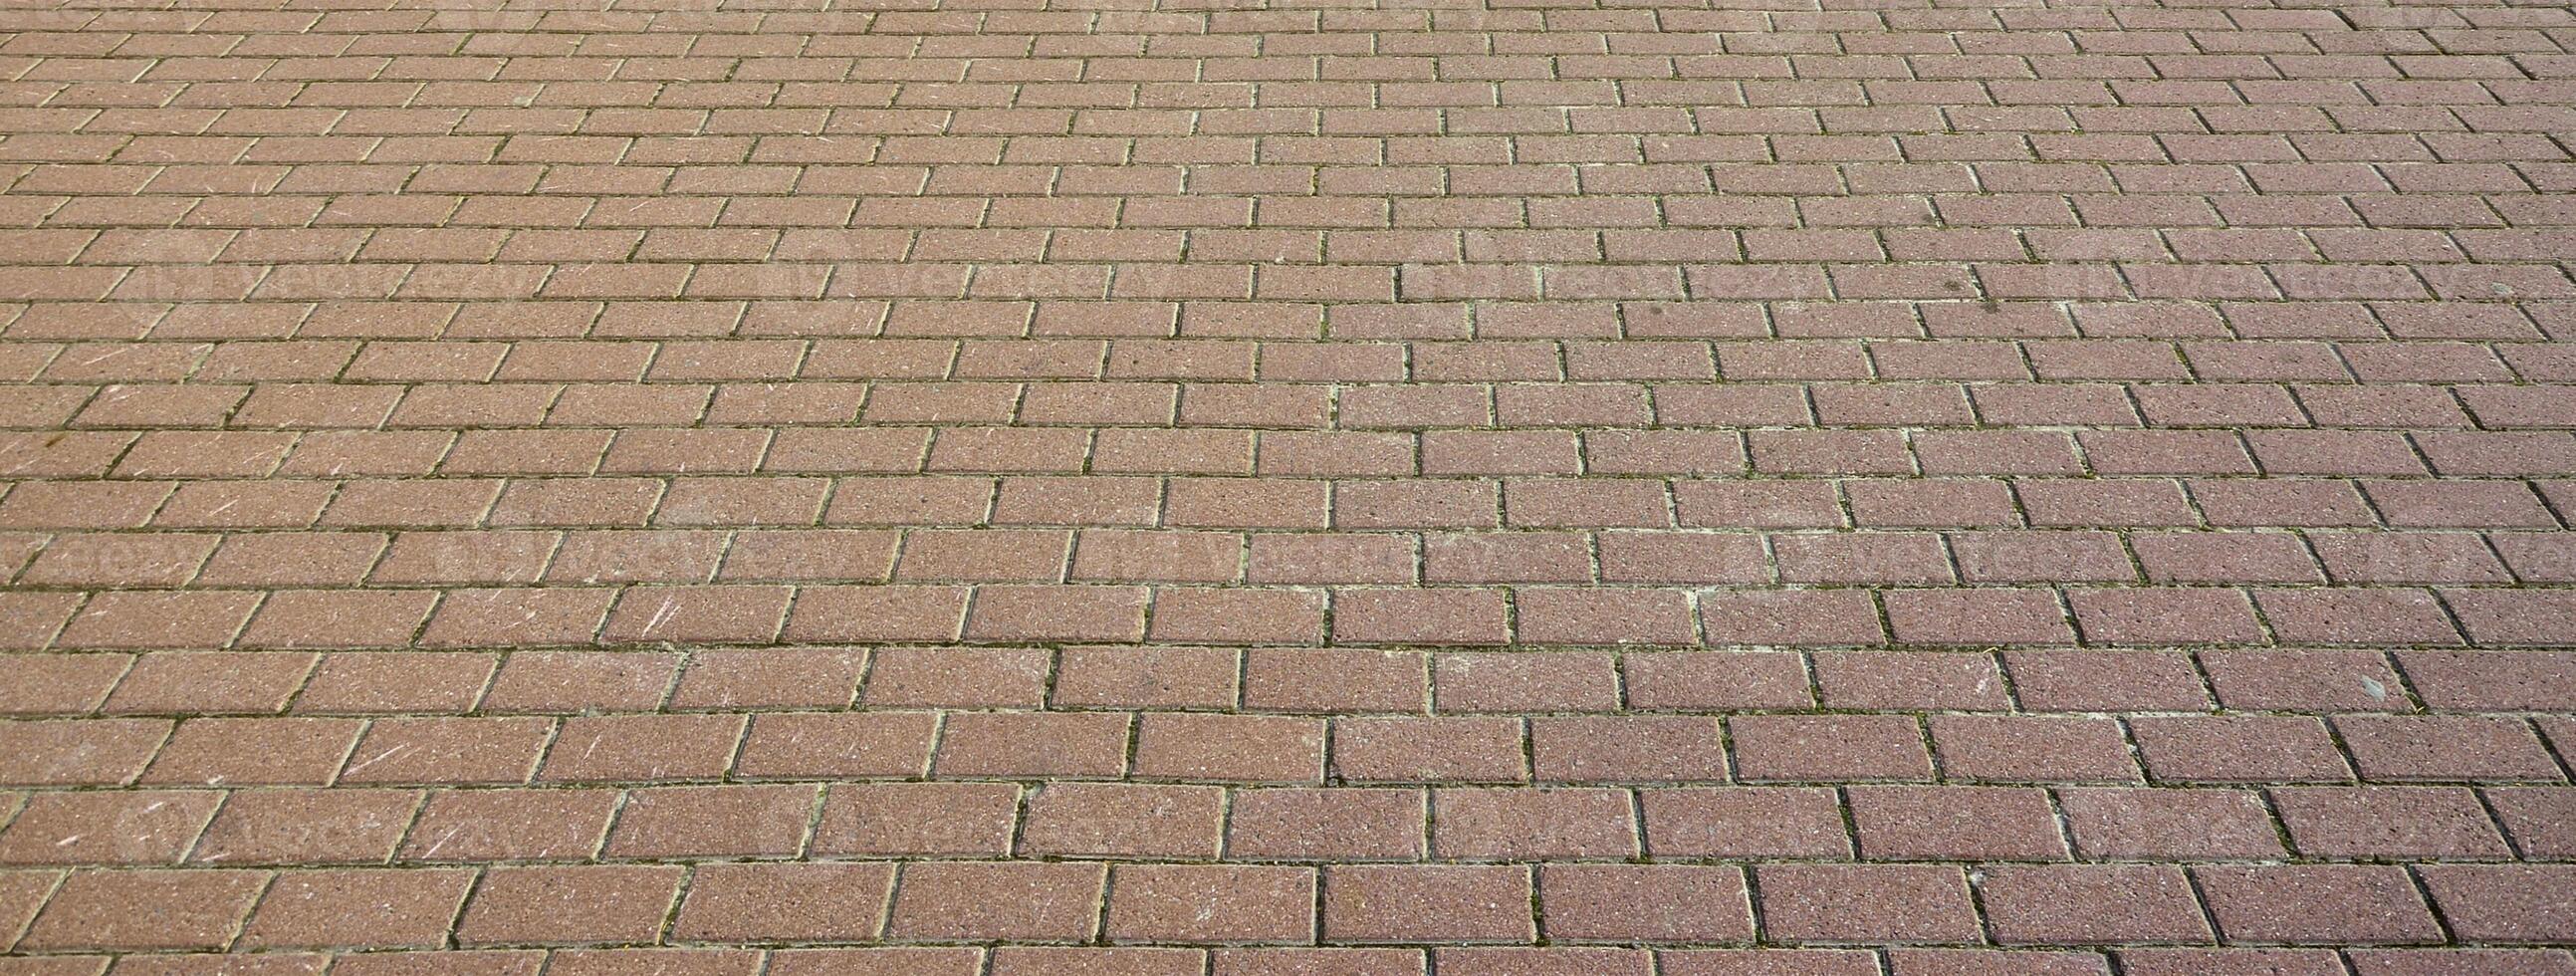 A large area, covered with a quality paving stone in daylight photo